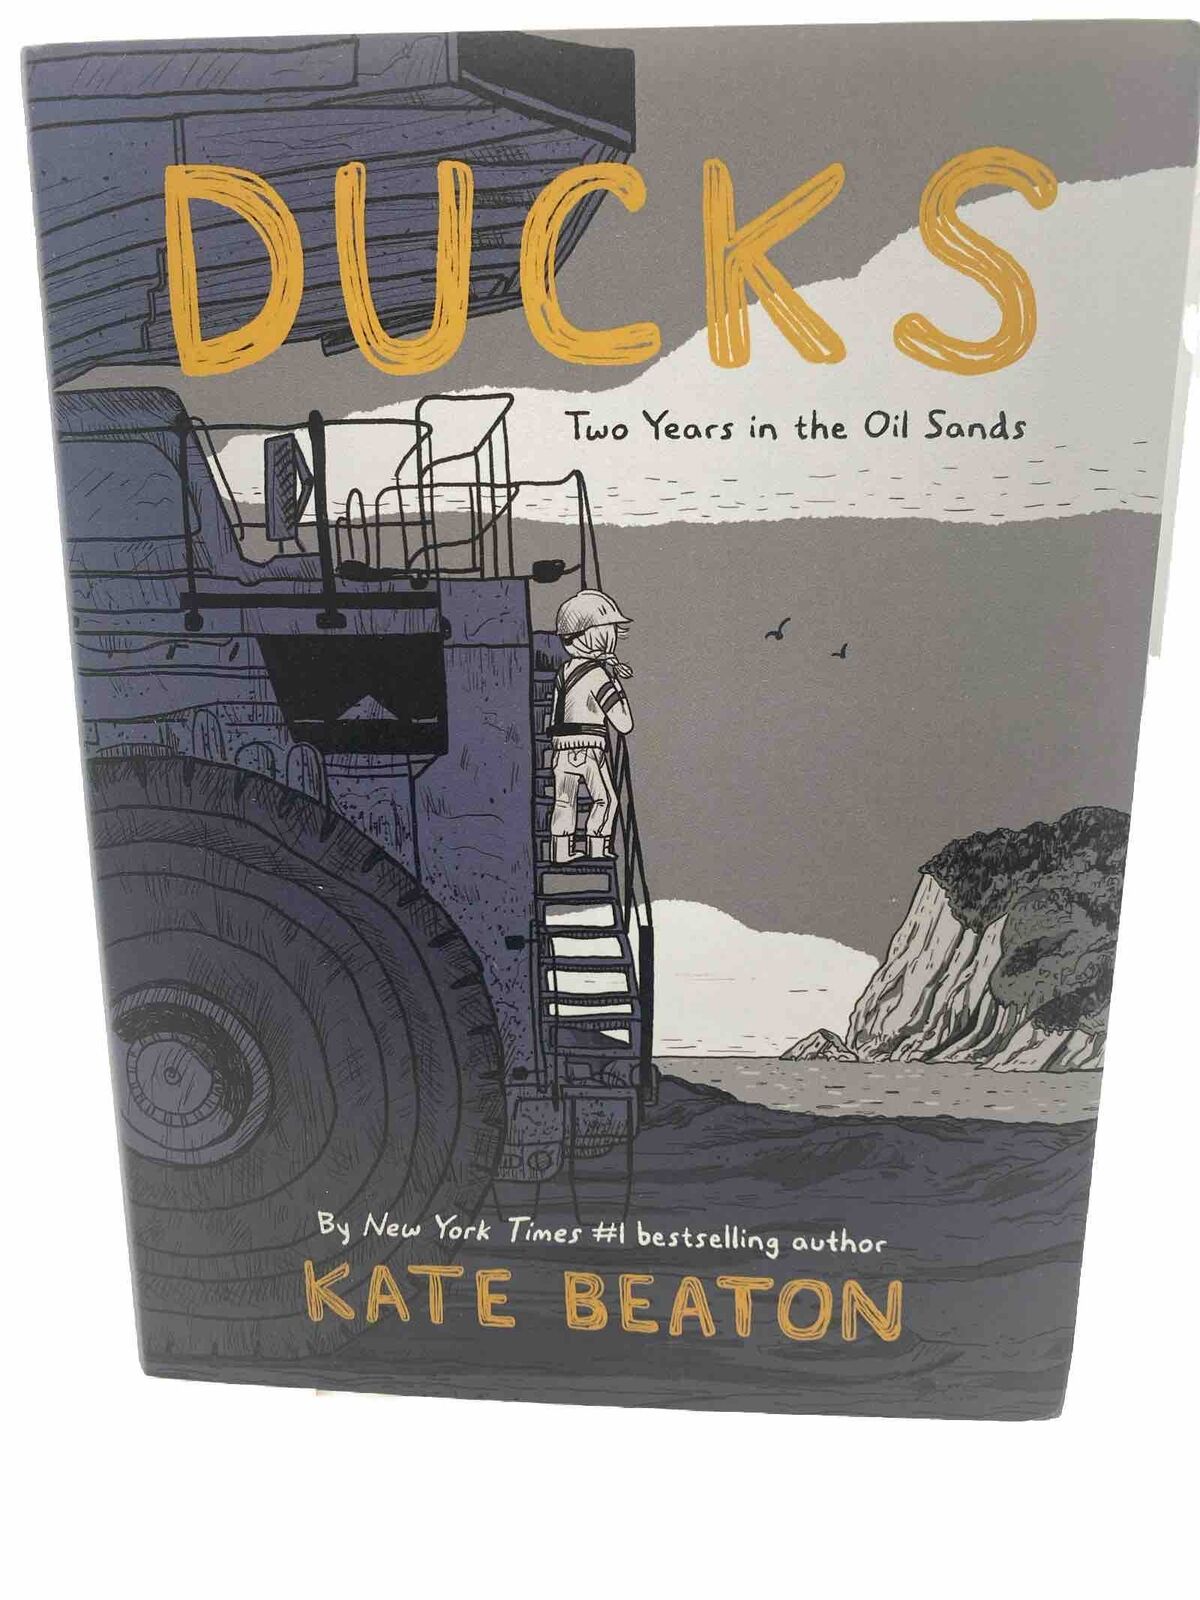 Ducks: Two Years in the Oil Sands, Kate Benton  Hardcover Excellent Shape